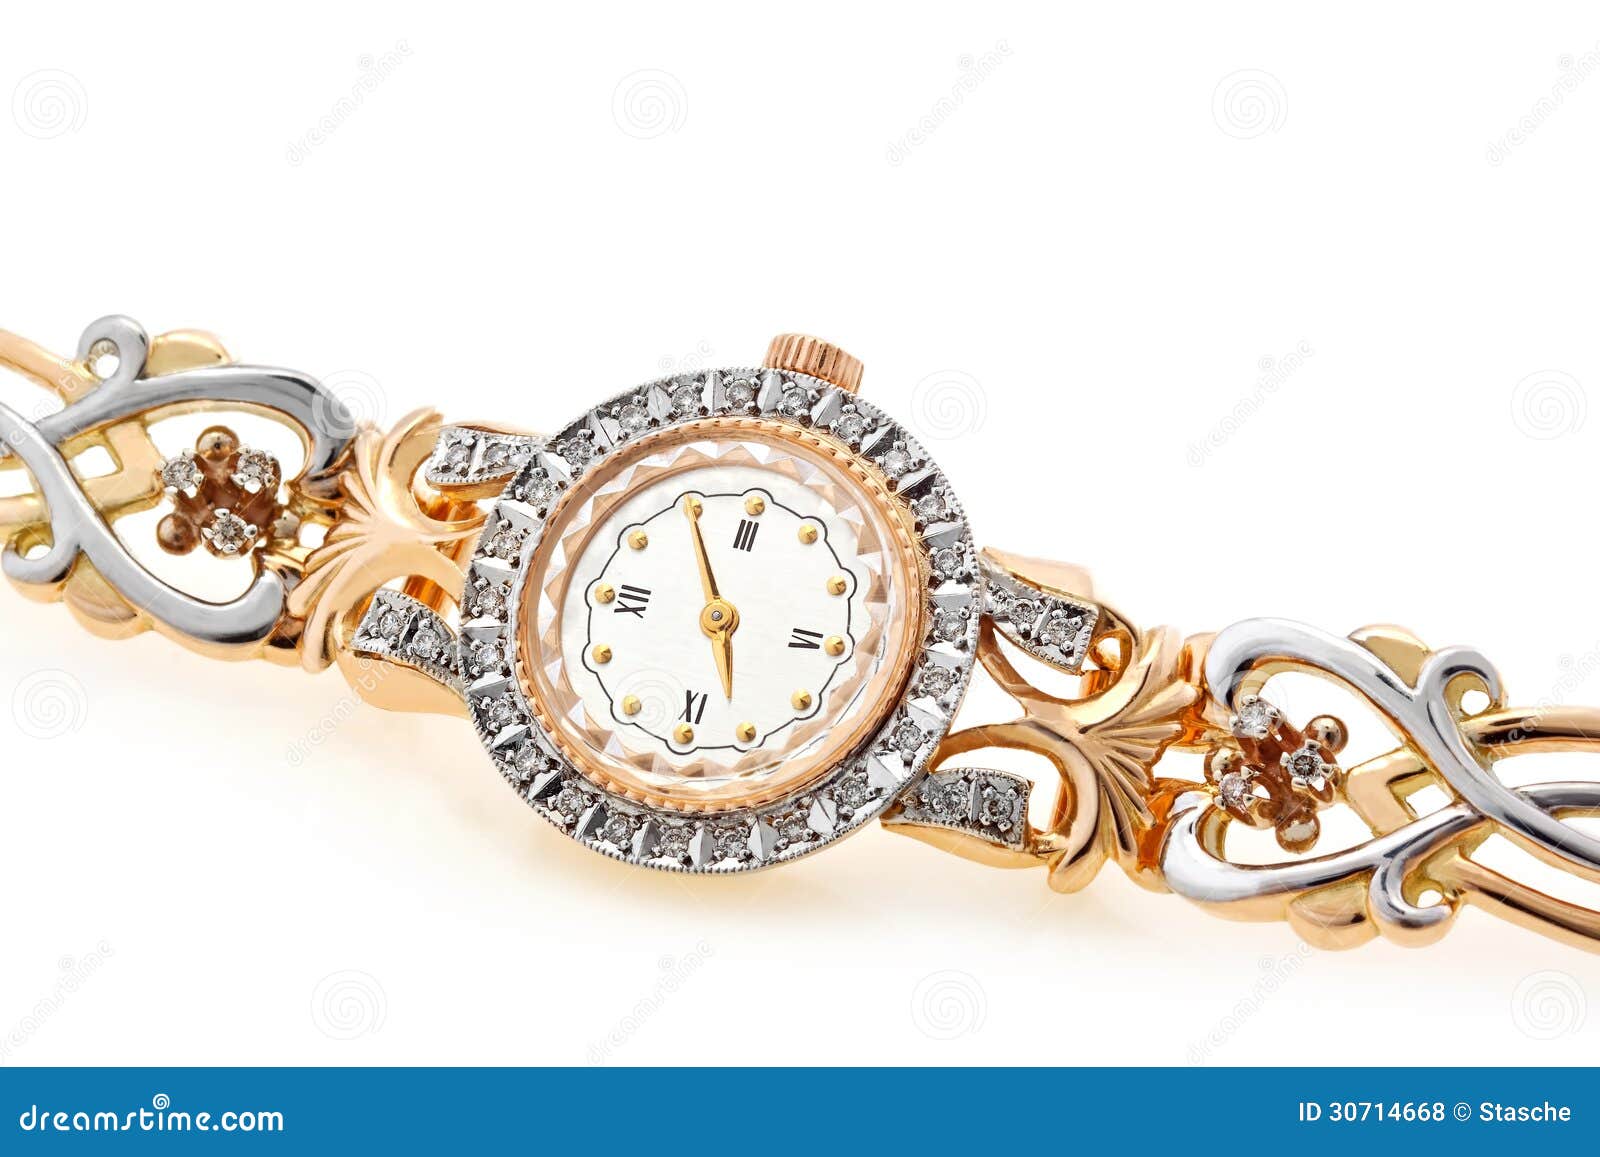 Female Golden Wrist Watch with Diamonds Close Up Stock Photo - Image of ...